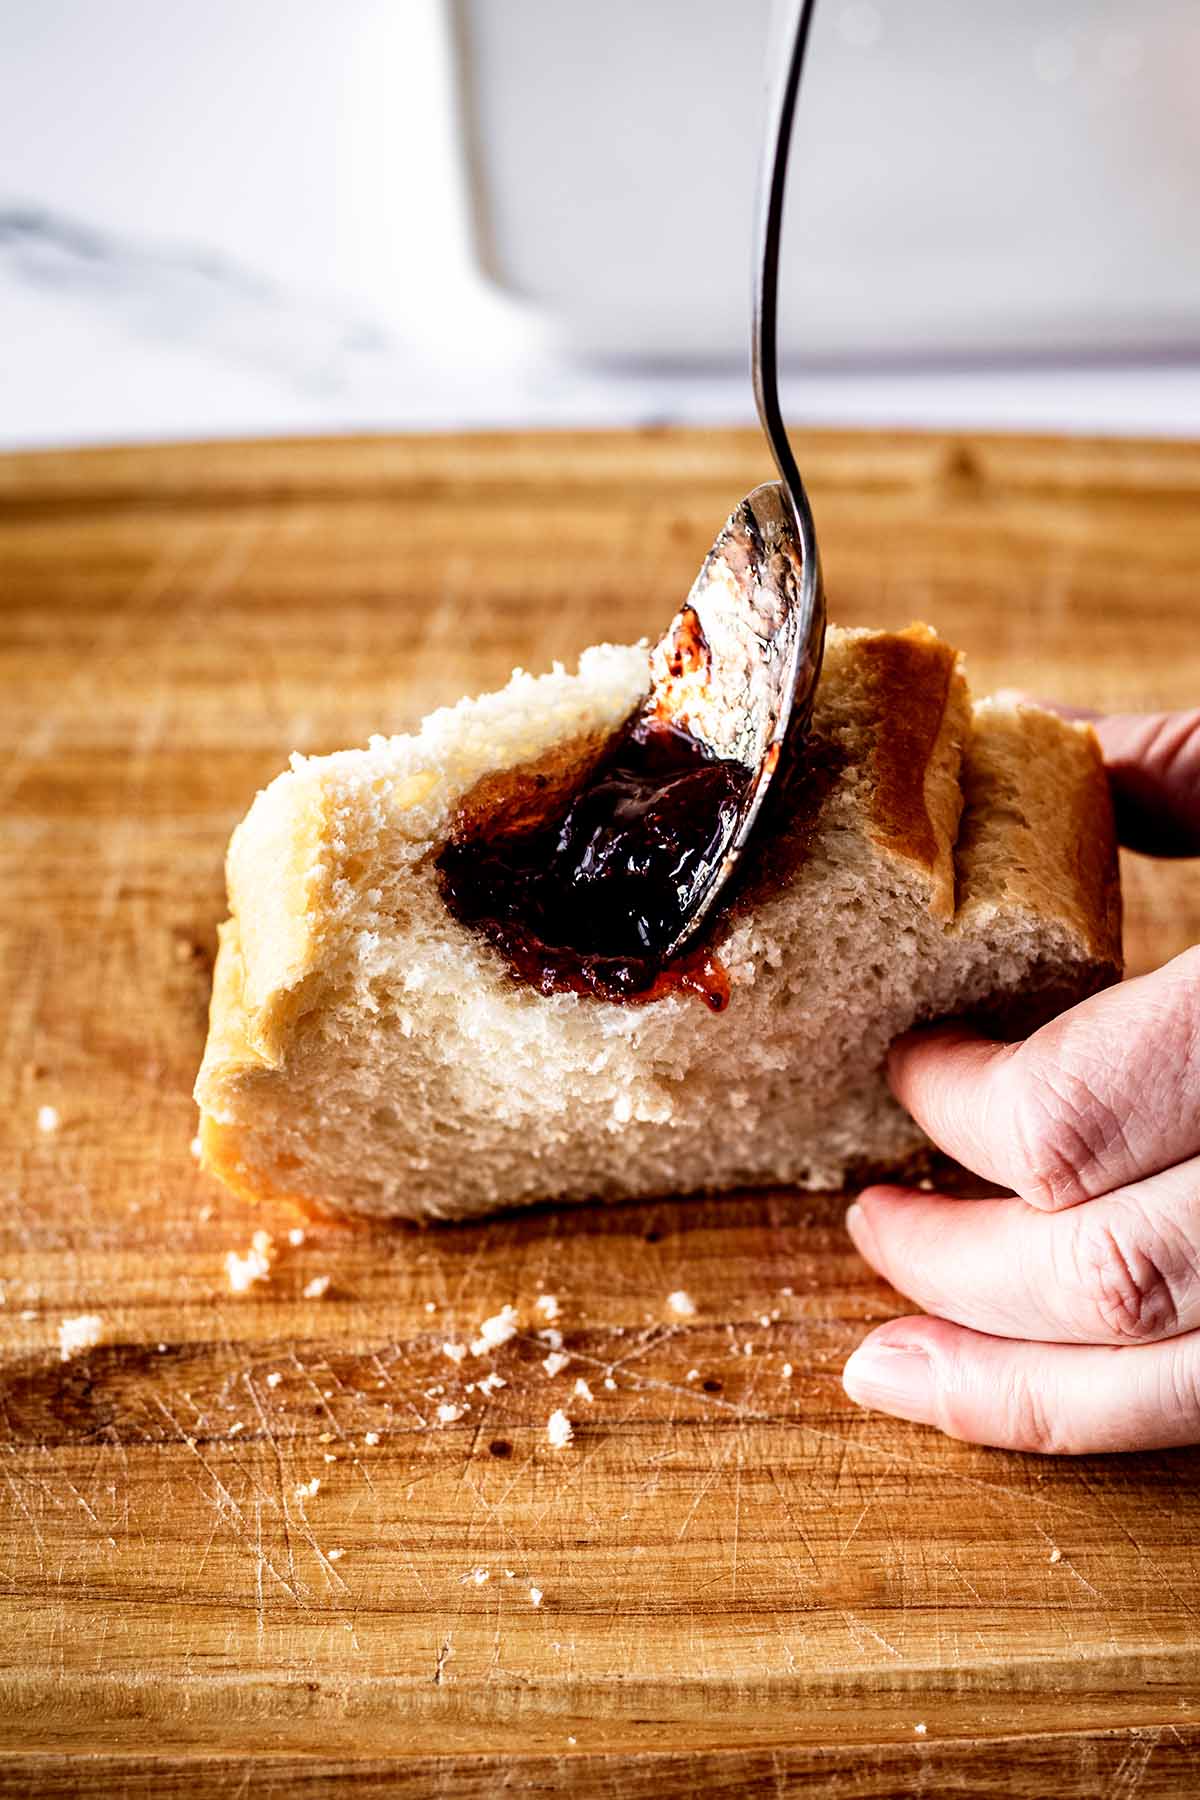 Spoon filling pocket in slice of bread with strawberry preserves